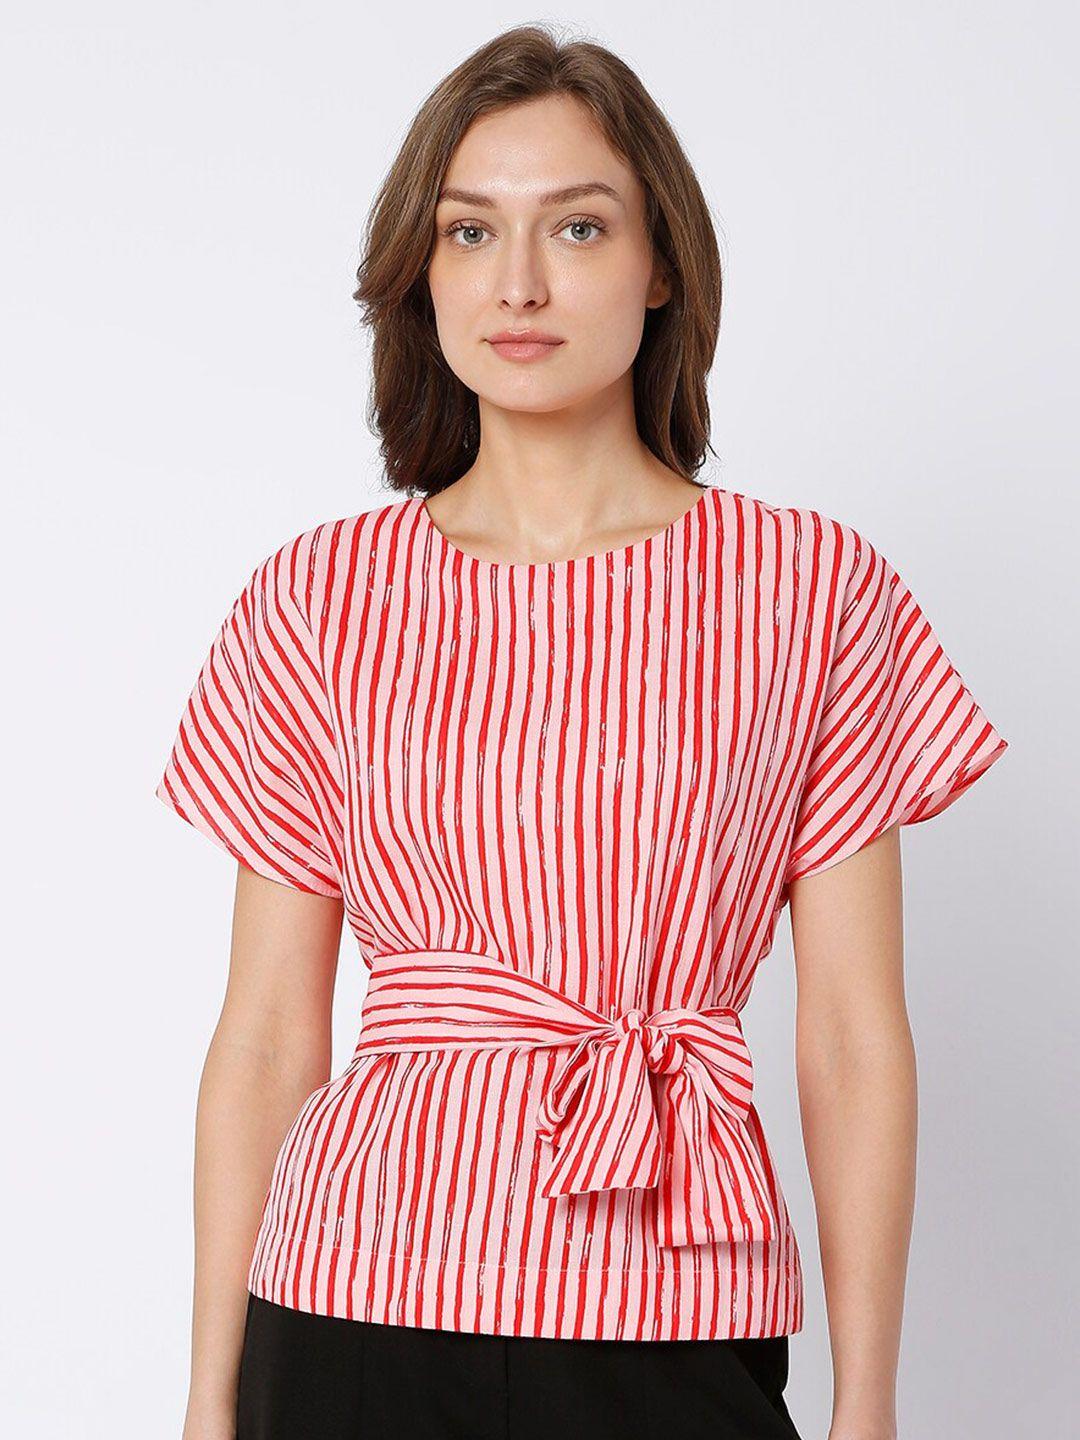 vero-moda-pink-&-white-striped-extended-sleeves-top